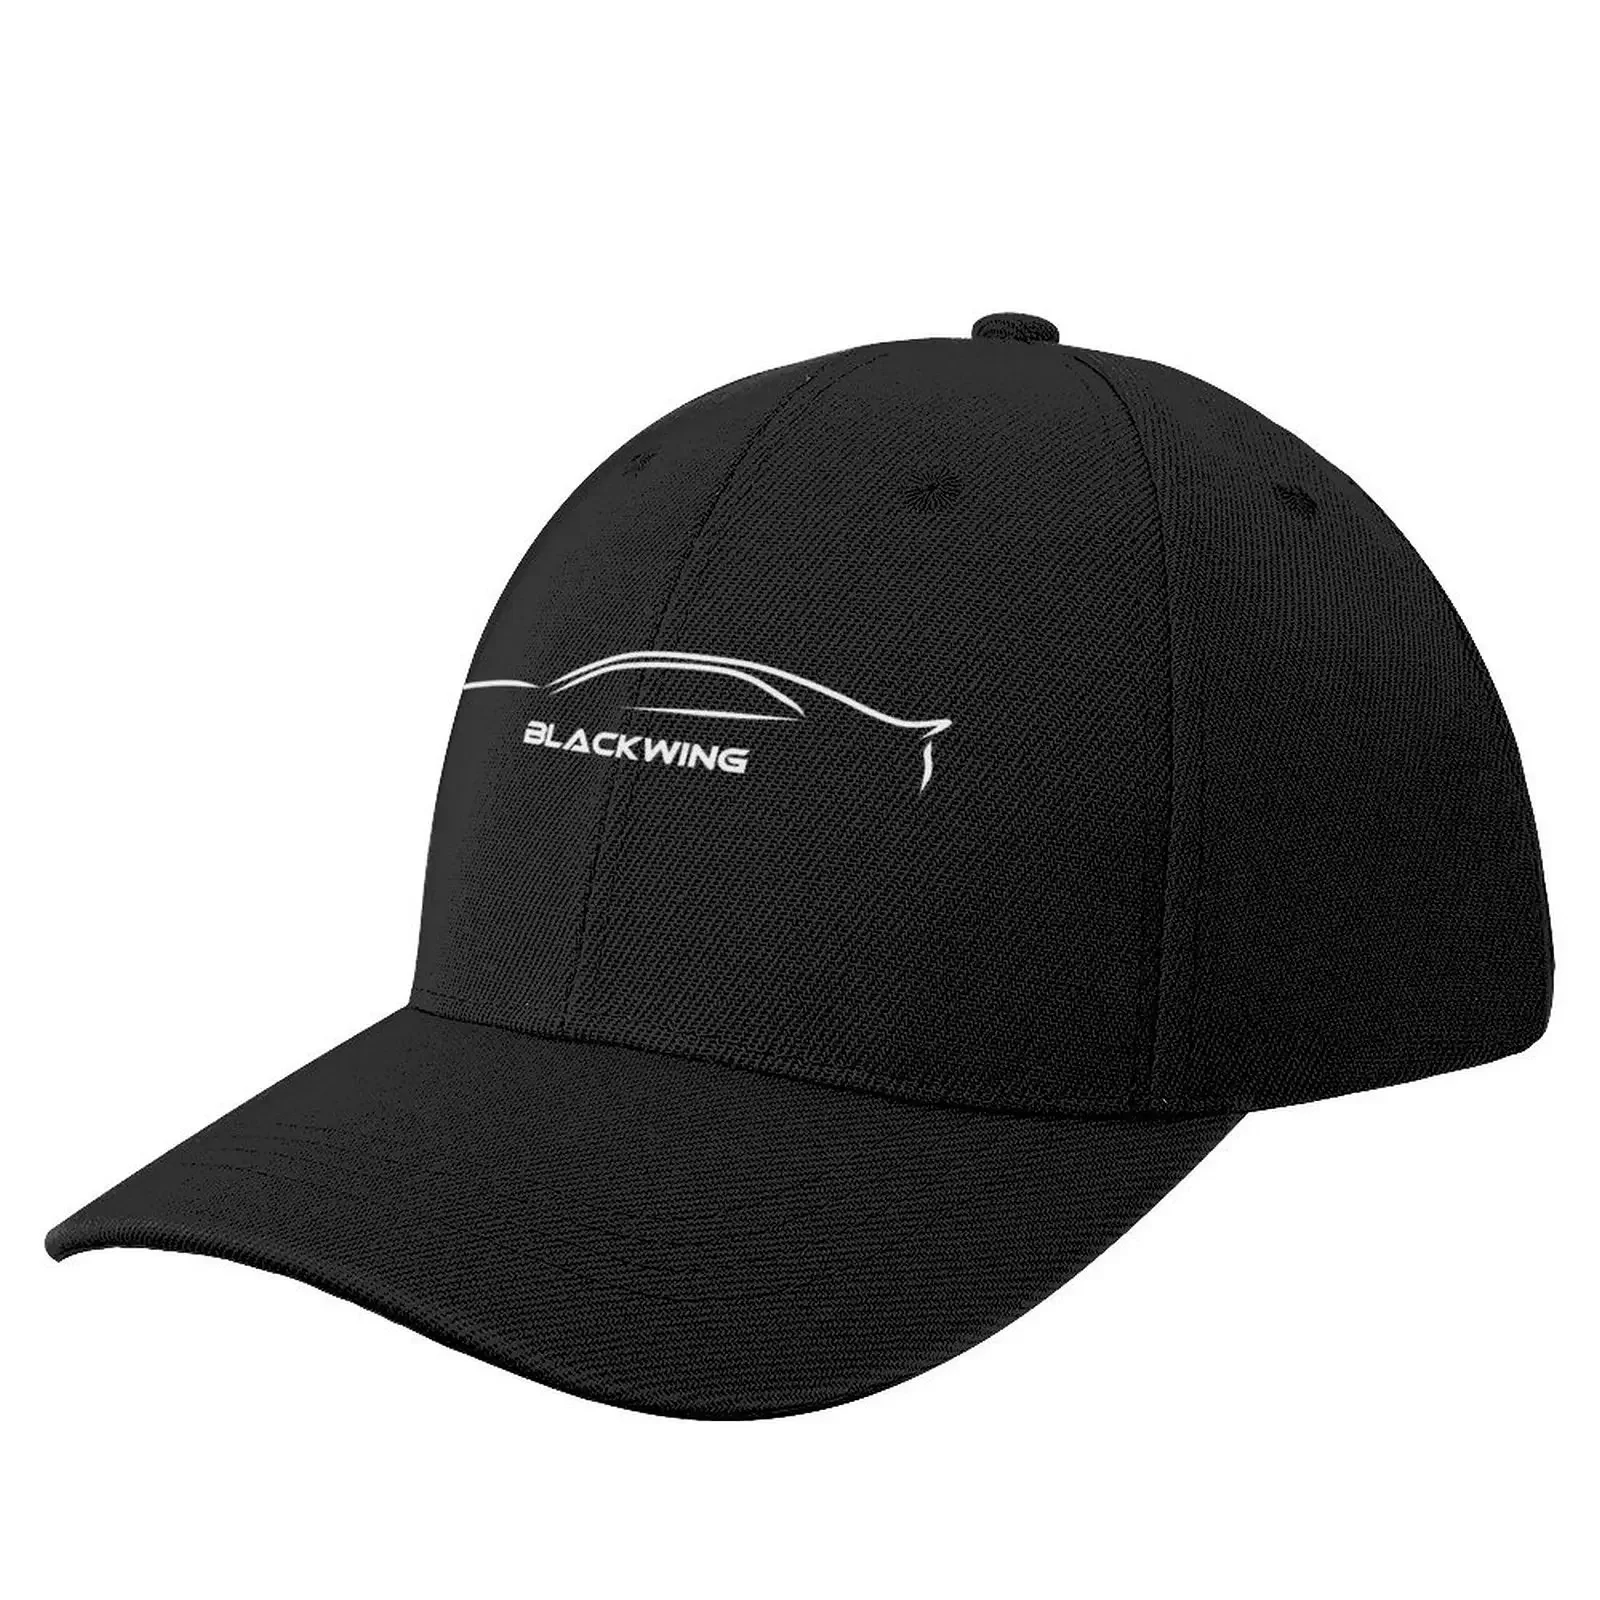 

CT4 Blackwing Outline Baseball Cap Hat Man For The Sun Big Size Hat Dropshipping Rugby For Girls Men's